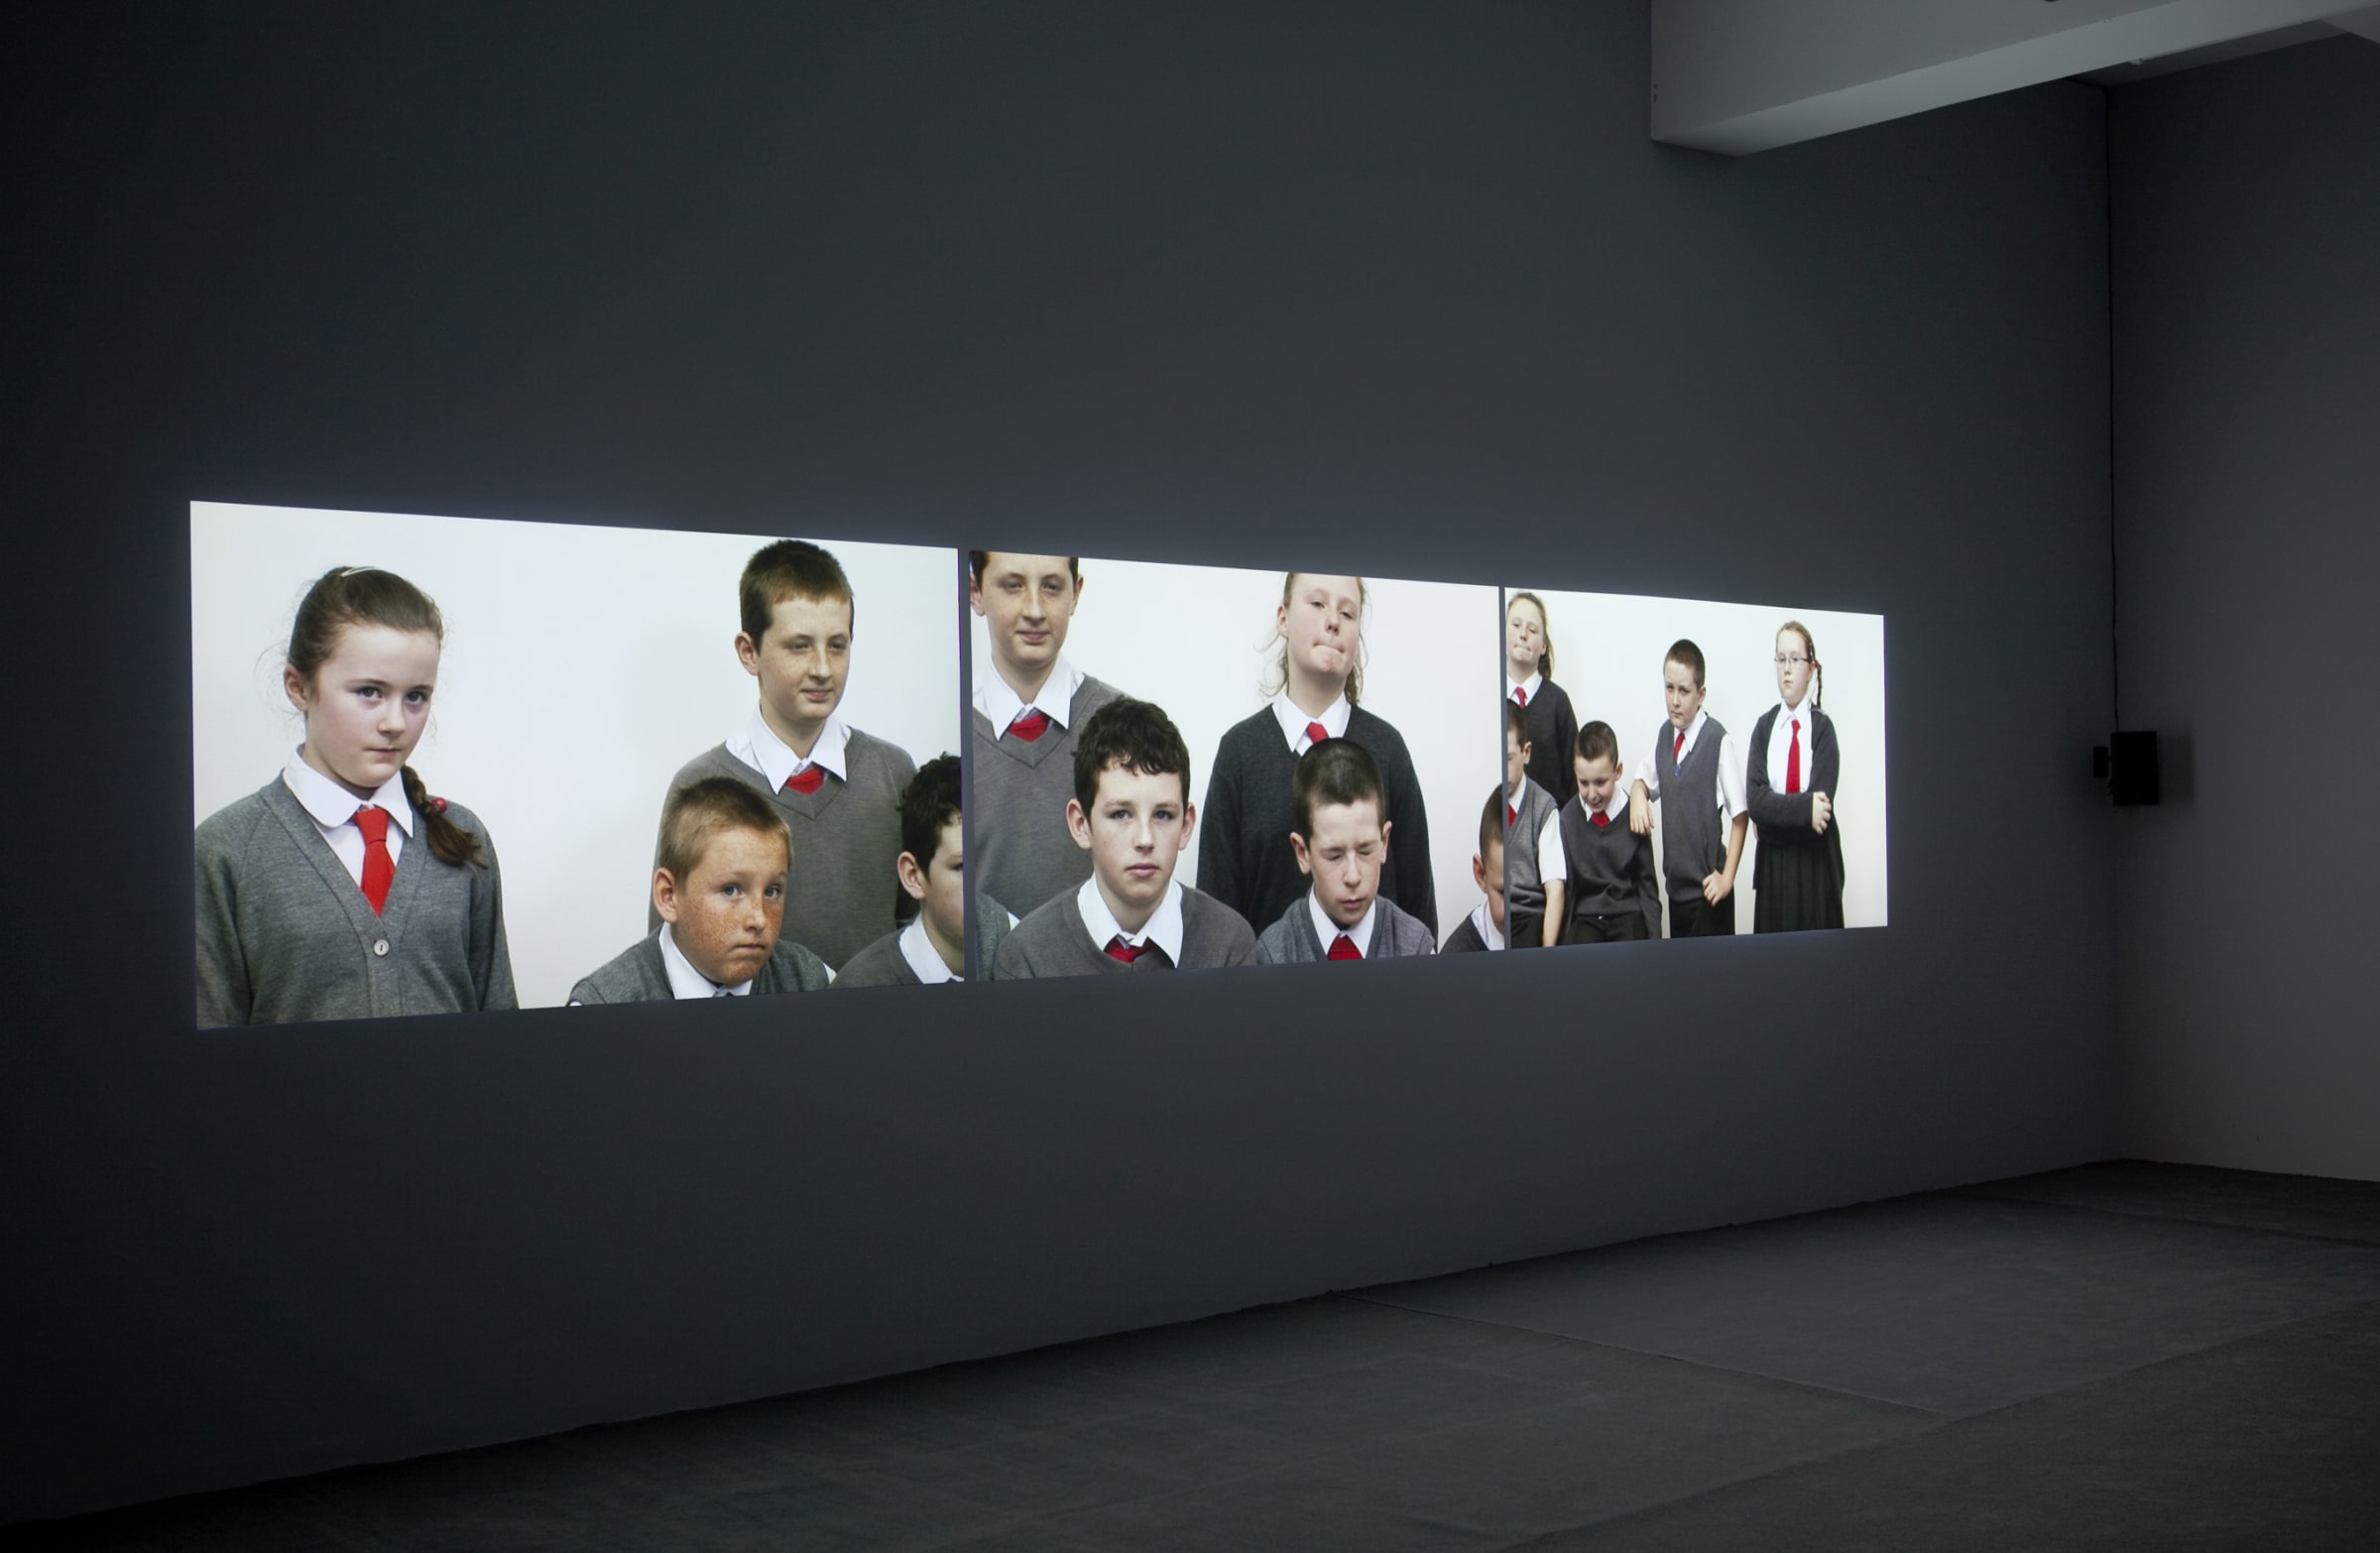 Three horizontal projections side by side in a dark room depict ten children in school uniforms with red ties and grey vests or sweaters against a white wall. 